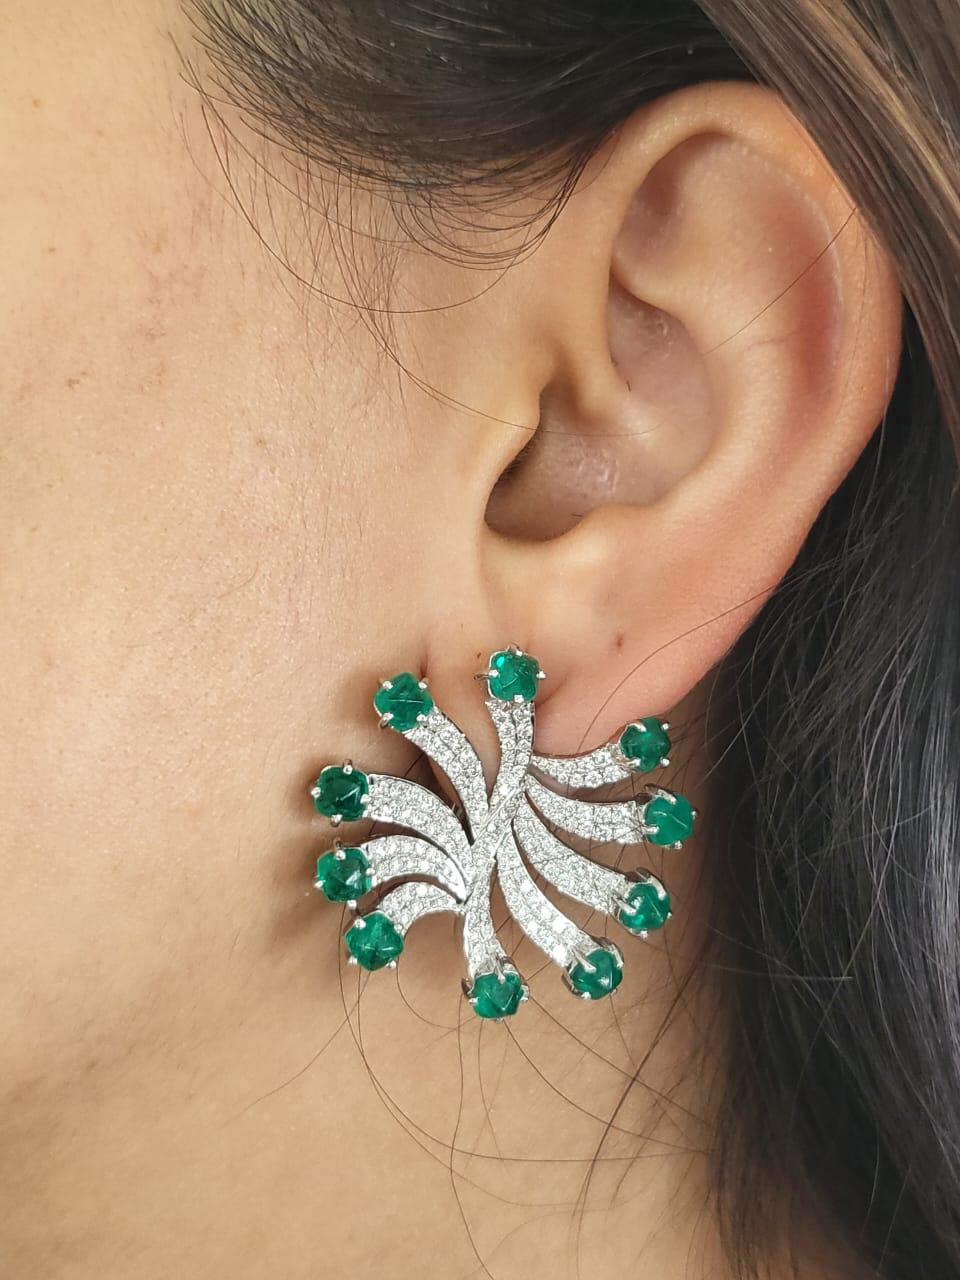 A very gorgeous and one of a kind, Art Deco style, Emerald Stud Earrings set in 18K White Gold & Diamonds. The weight of the Emerald is 7.11 carats. The sugarloaf cabochon Emeralds are completely natural, without any treatment and is of Columbian